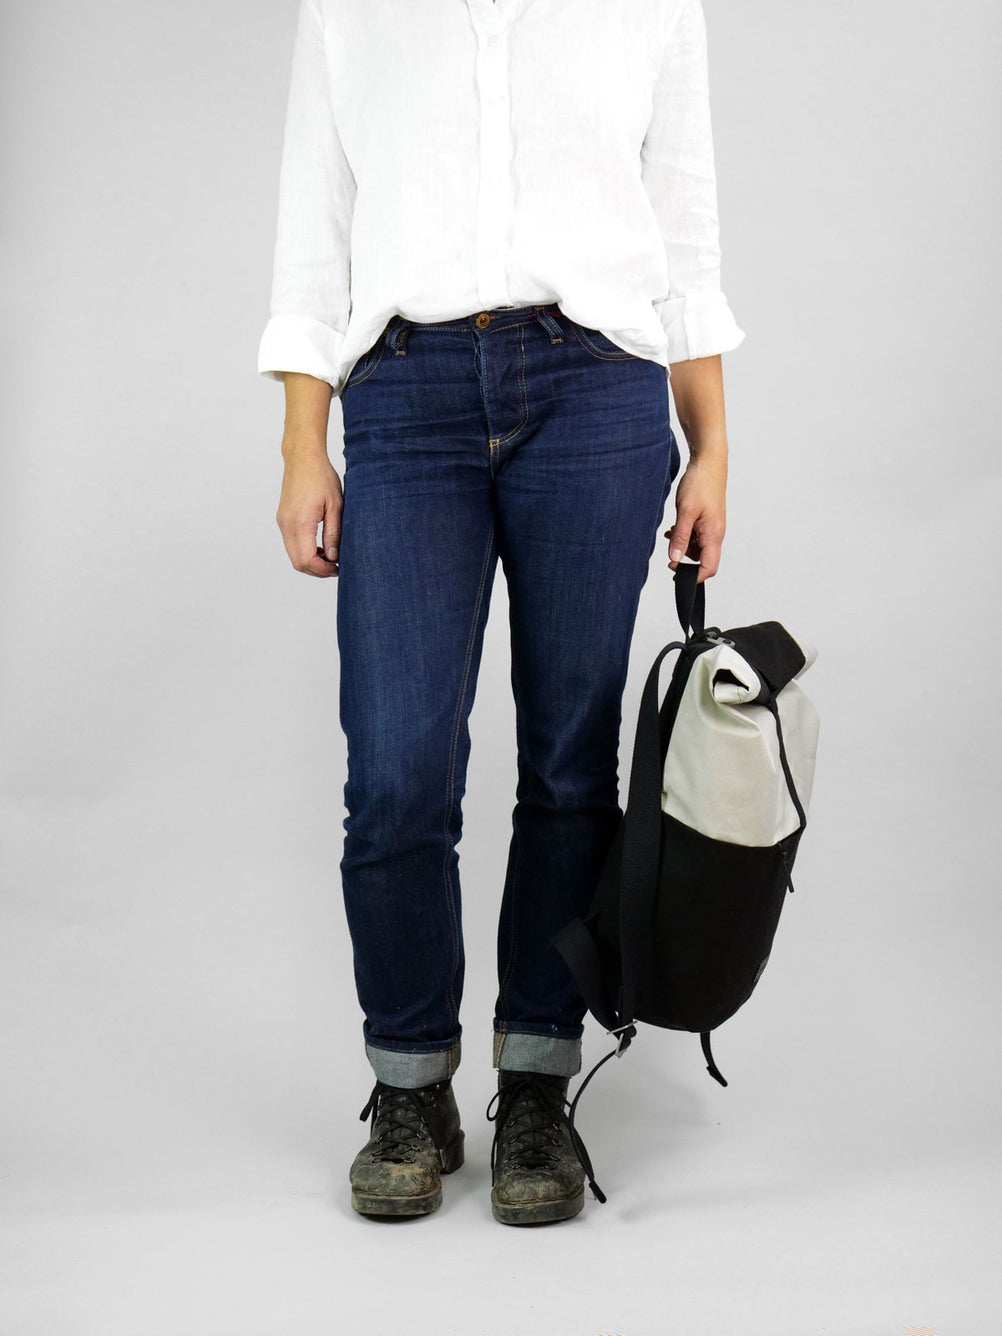 Informal woman easily holding Max the backpack. A rolltop backpack made of waxed canvas in chalk white and black, being held by a handle on top of the bag. 